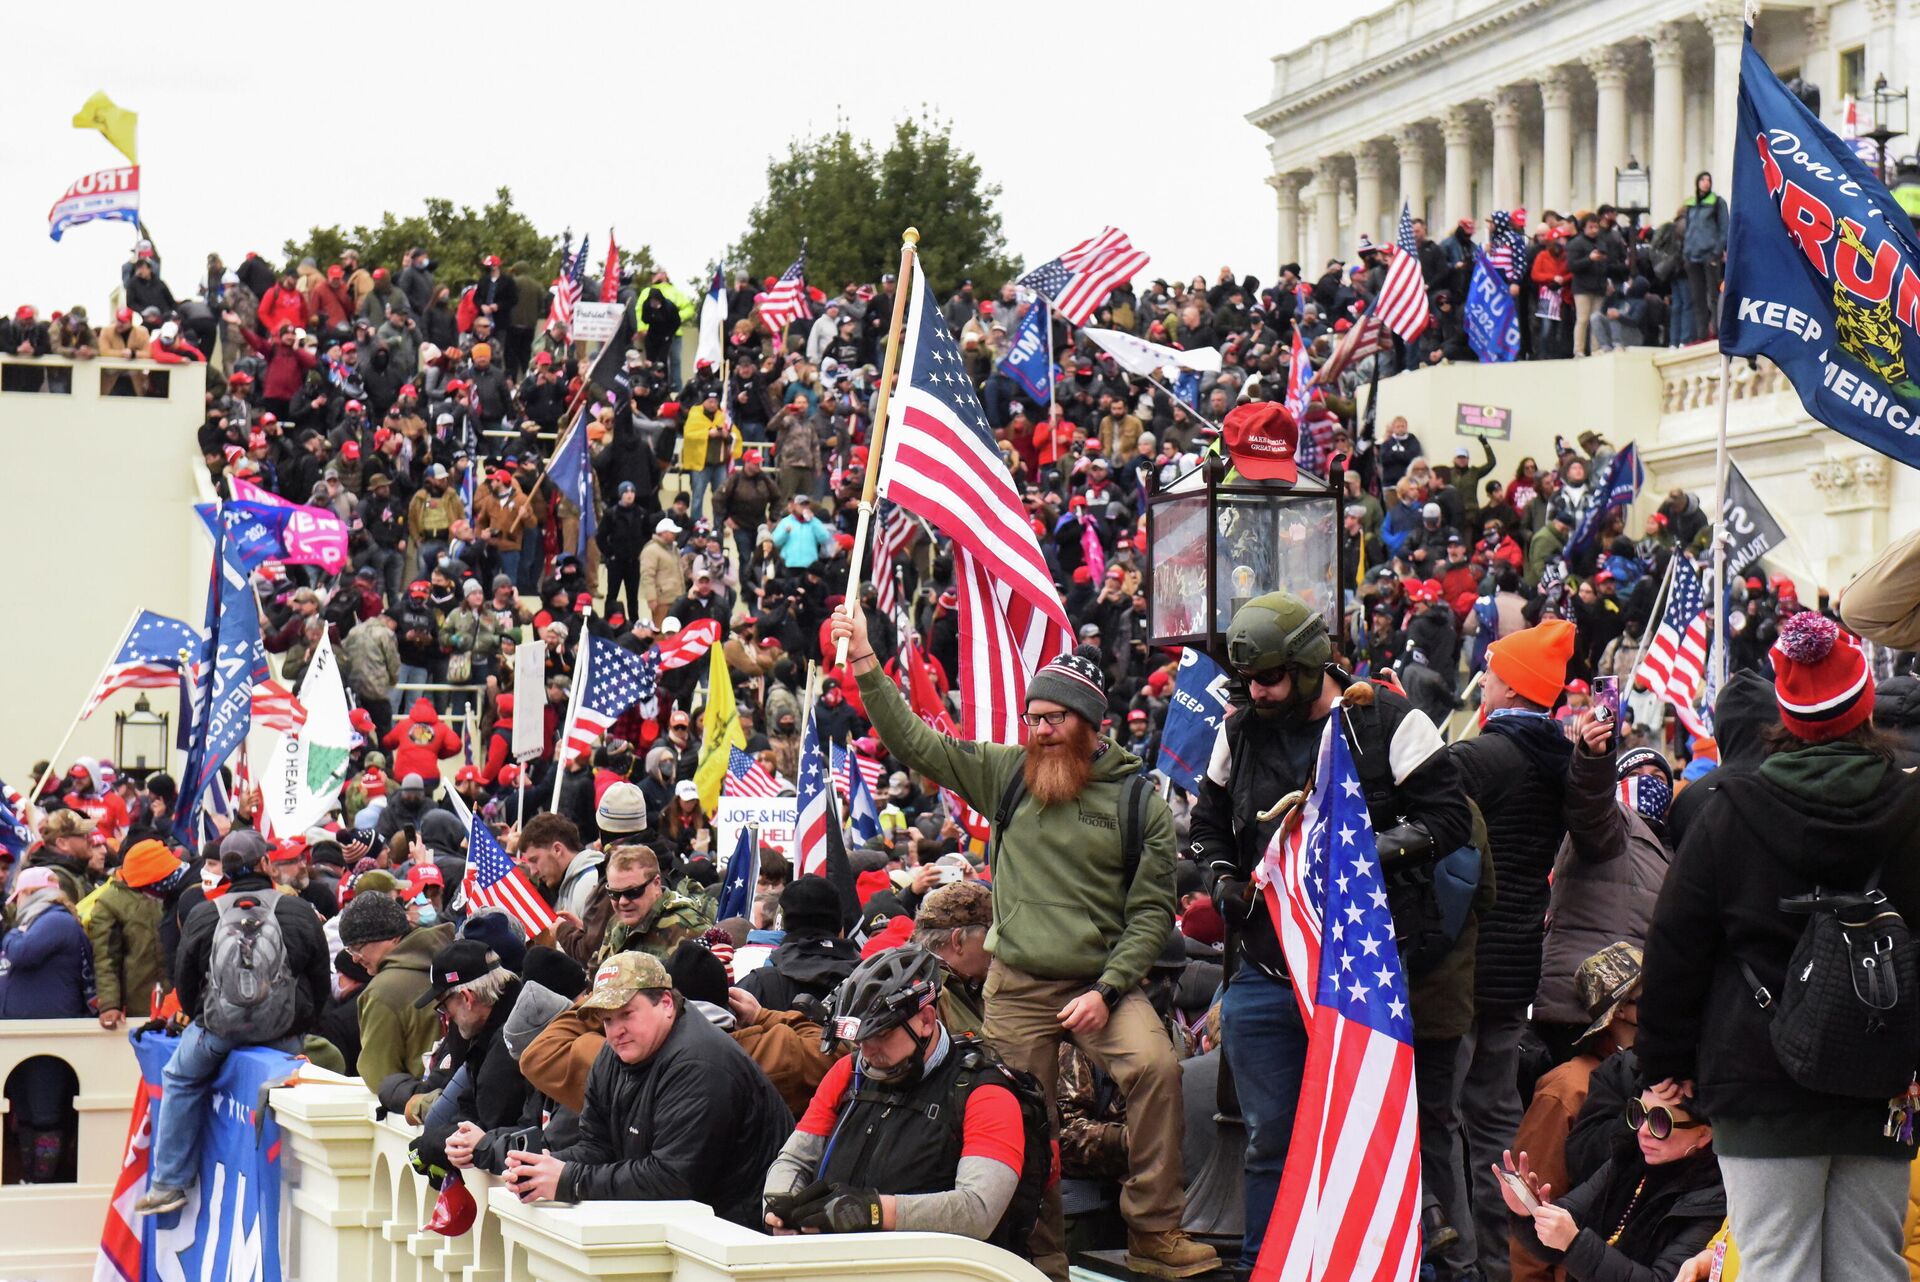 Supporters of U.S. President Donald Trump gather in front of the U.S. Capitol Building in Washington, U.S. January 6, 2021 - Sputnik International, 1920, 07.10.2021